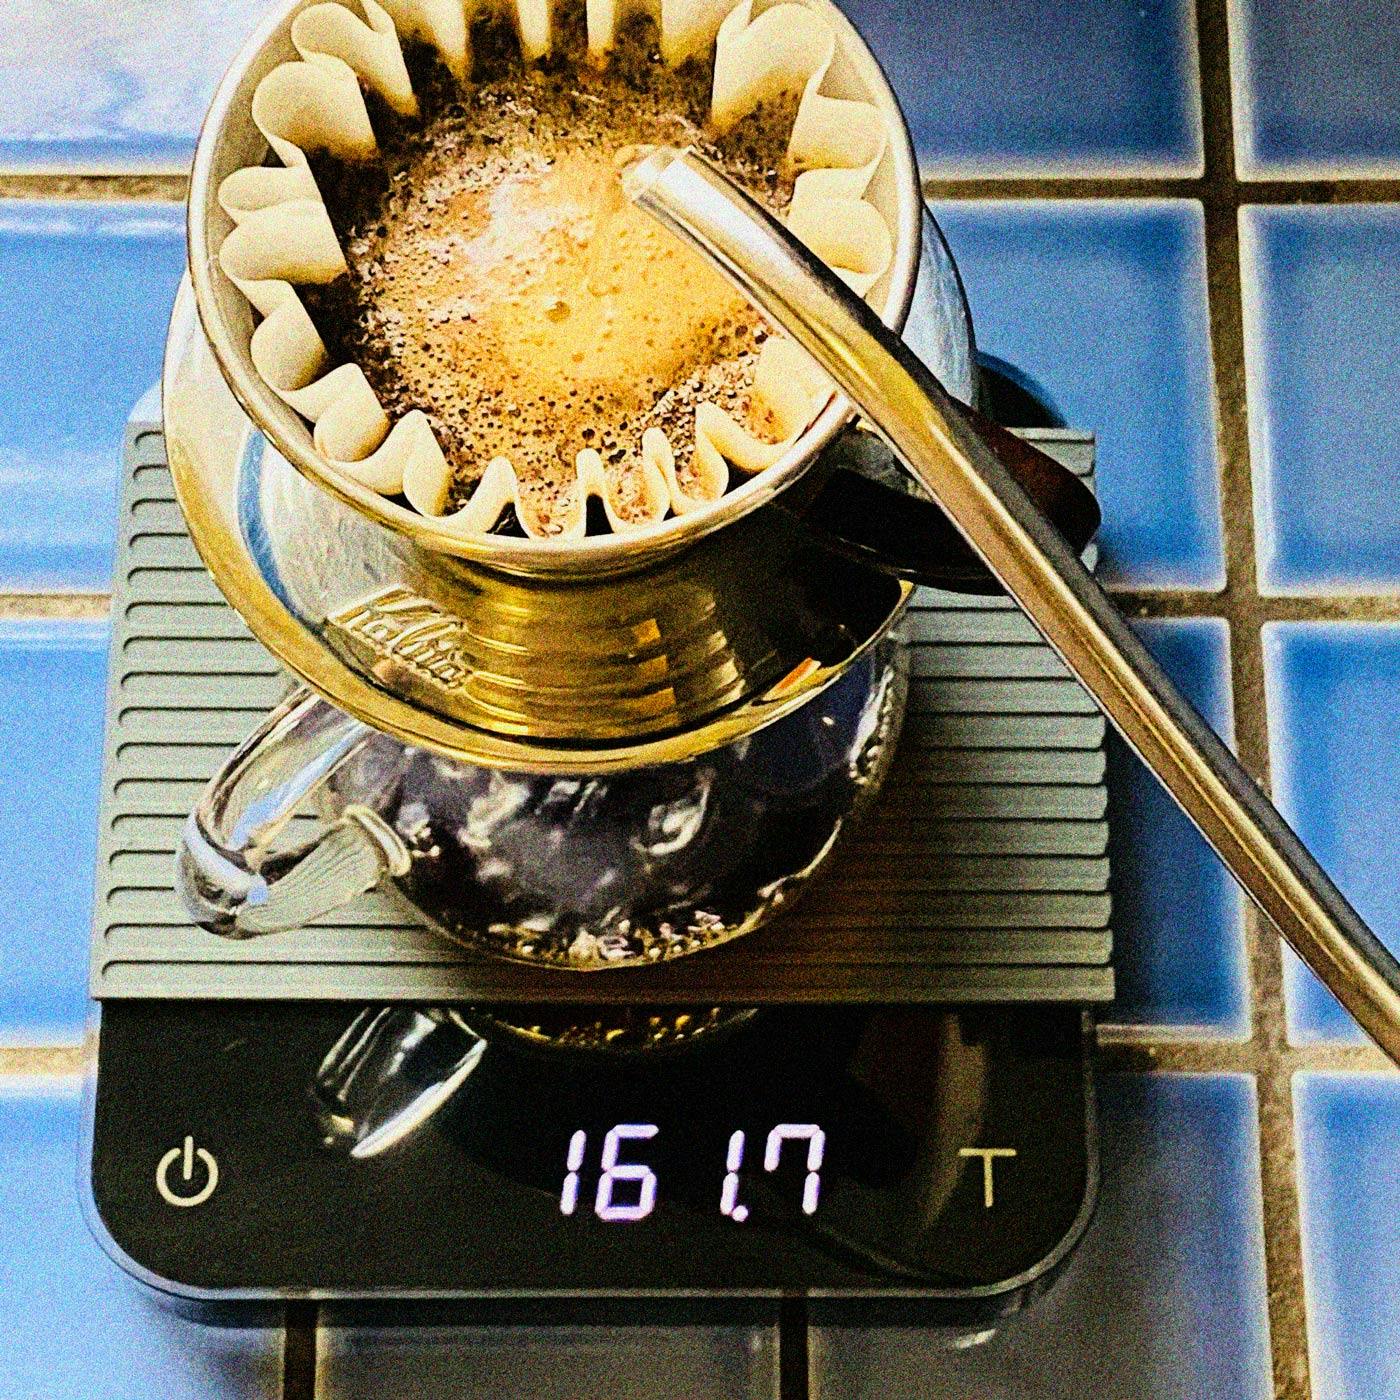 KitchenTour White Espresso Scale and Coffee Scale with Timer